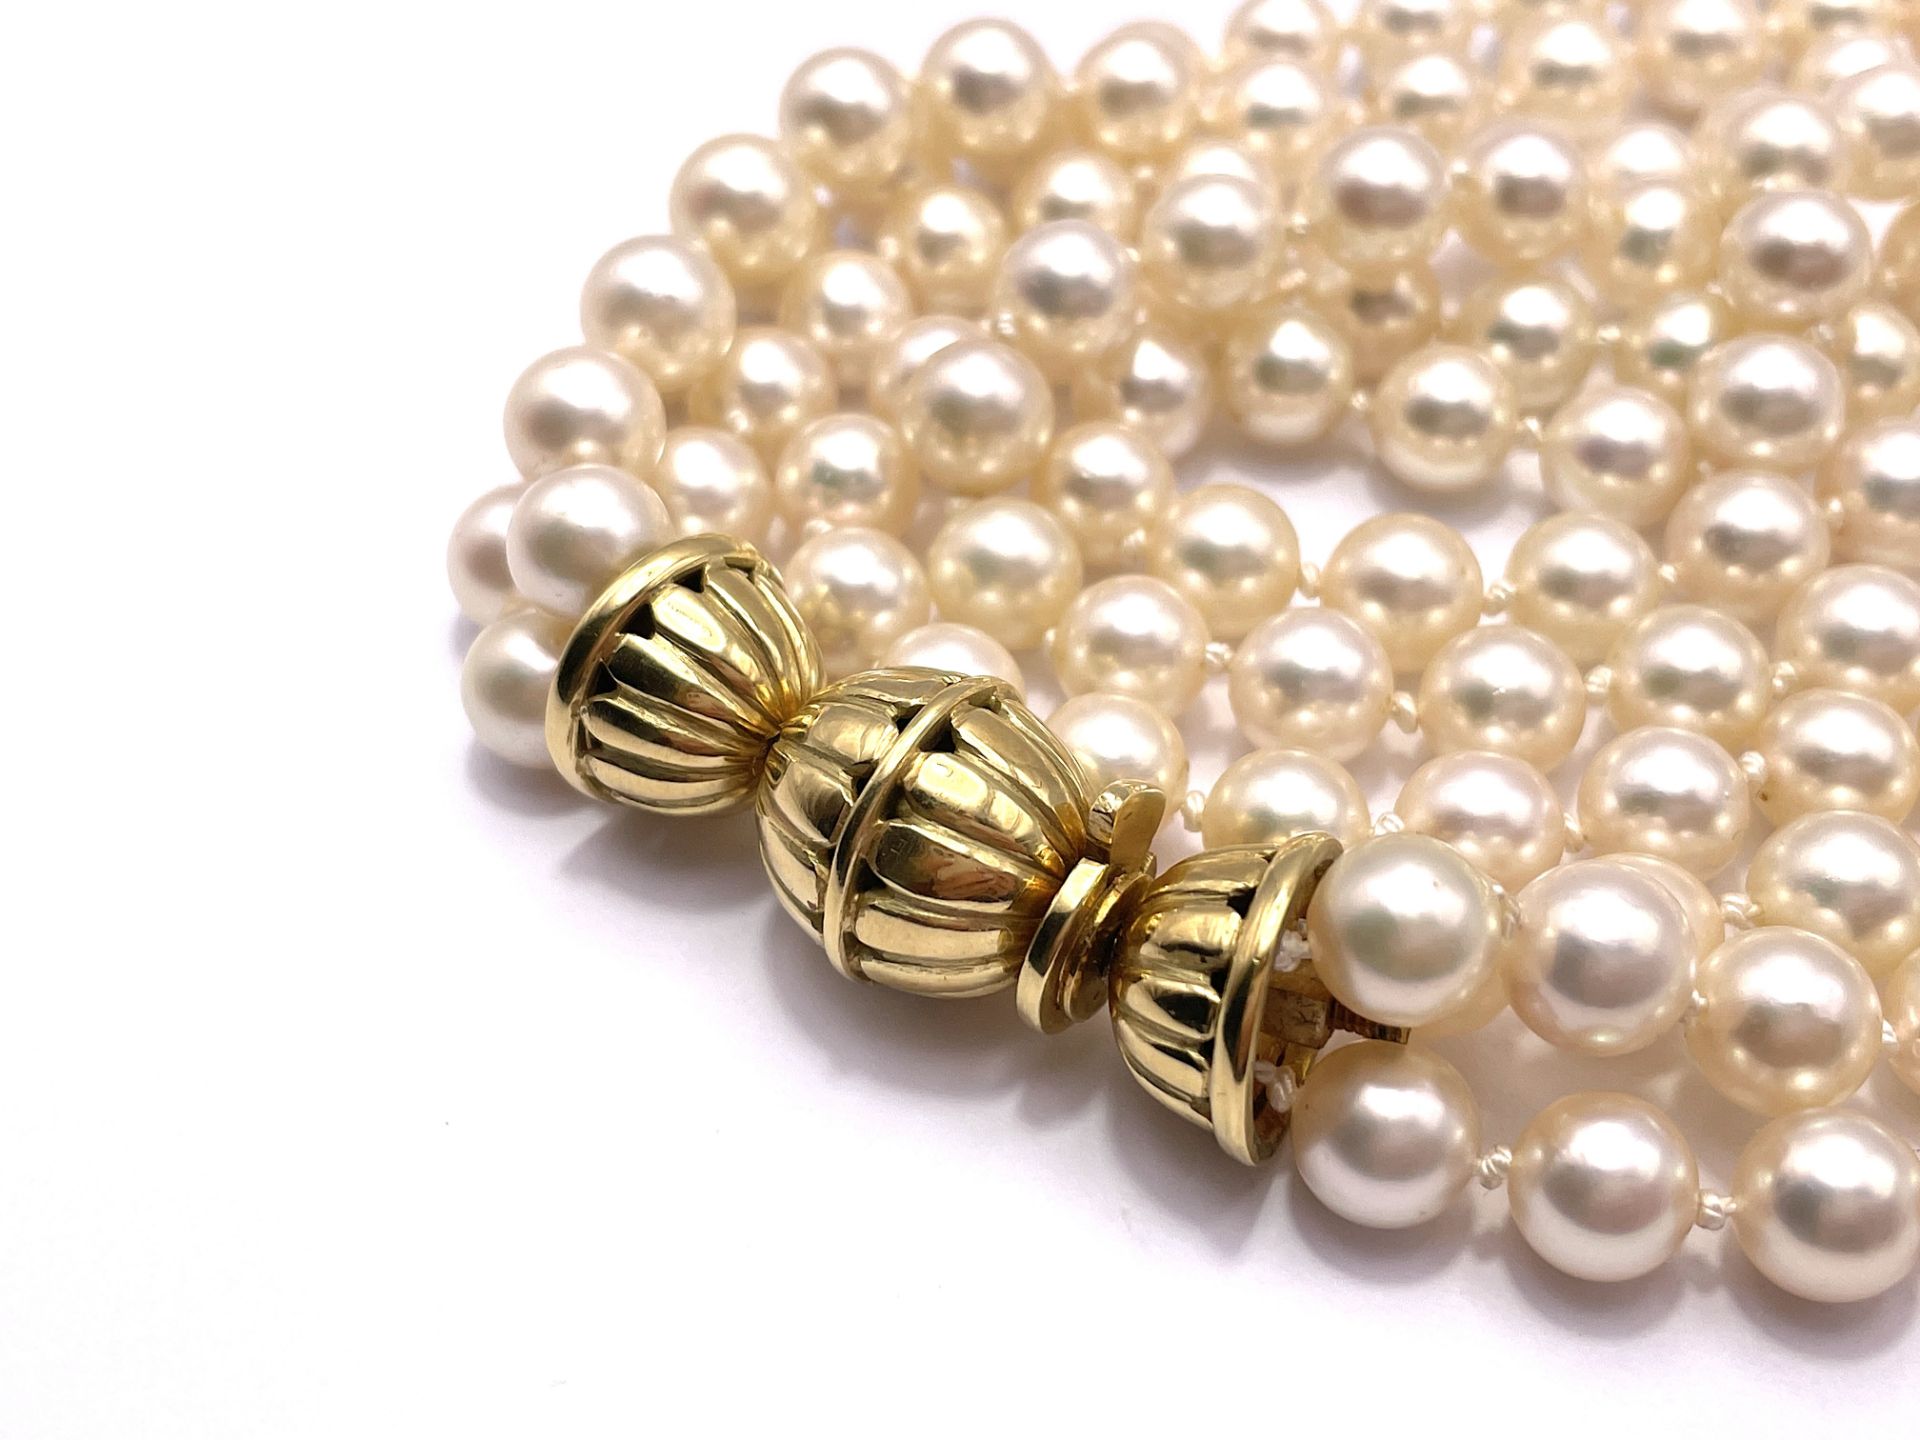 Akoya pearl necklace - Image 5 of 9